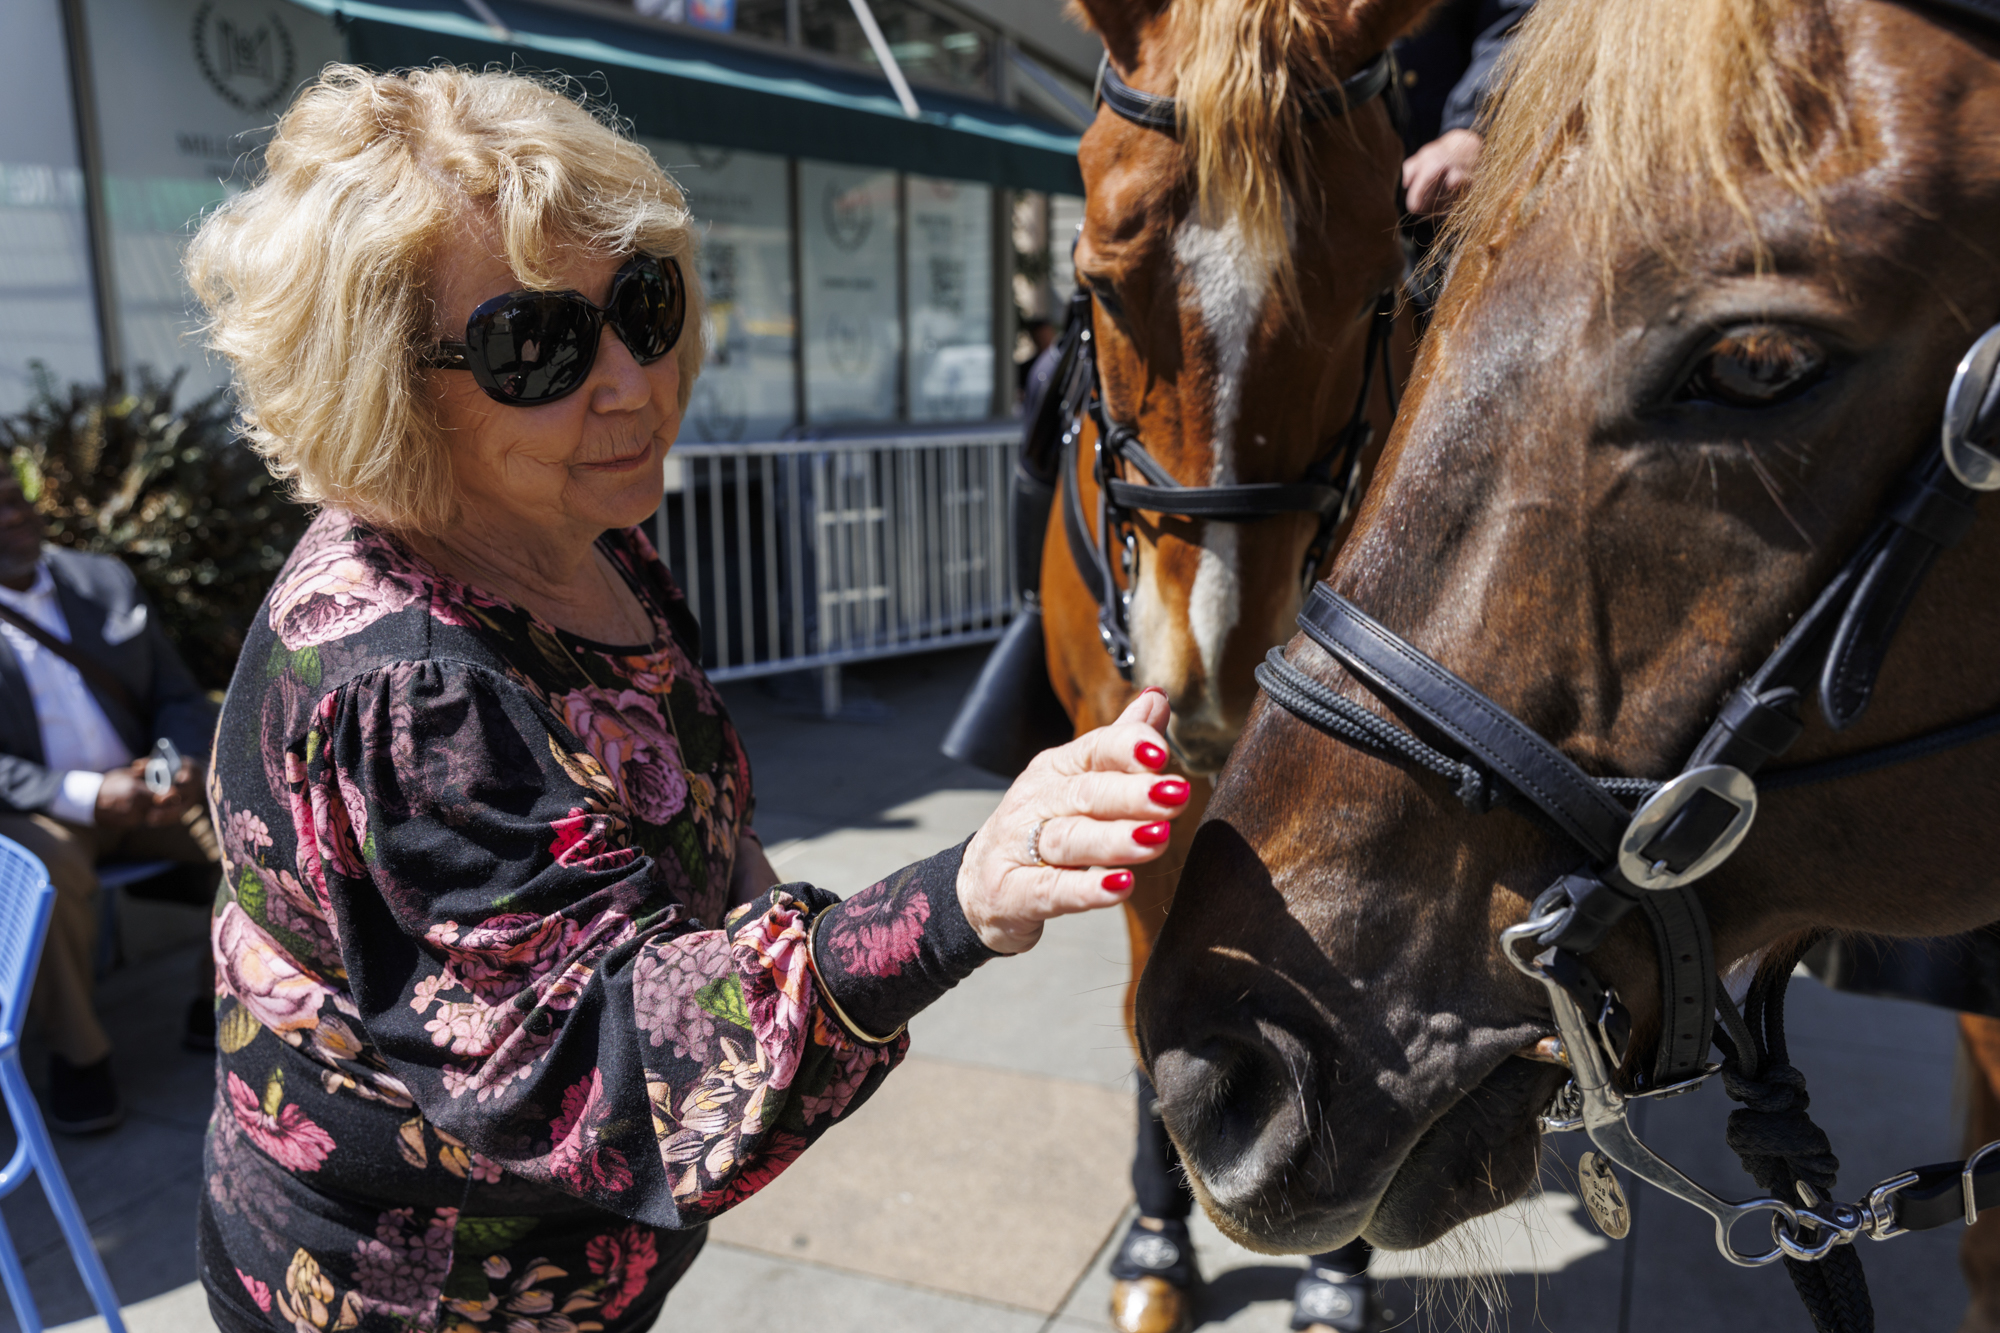 An older woman in sunglasses pets police horses on the street in San Francisco.